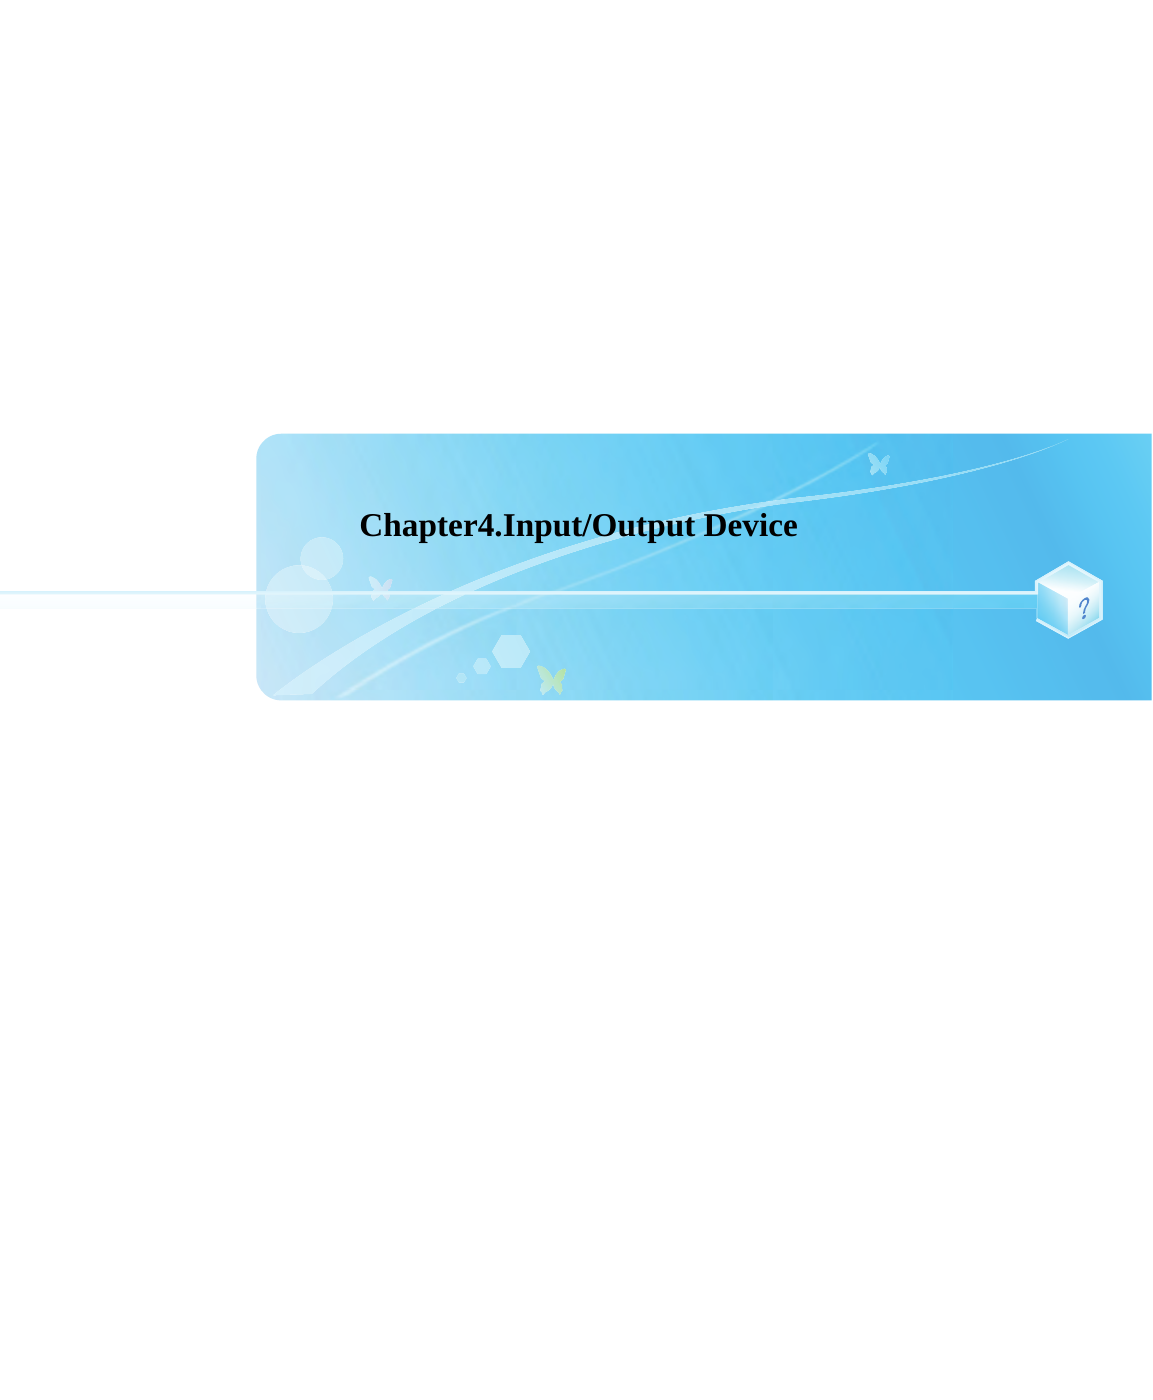 Chapter4.Input/Output Device